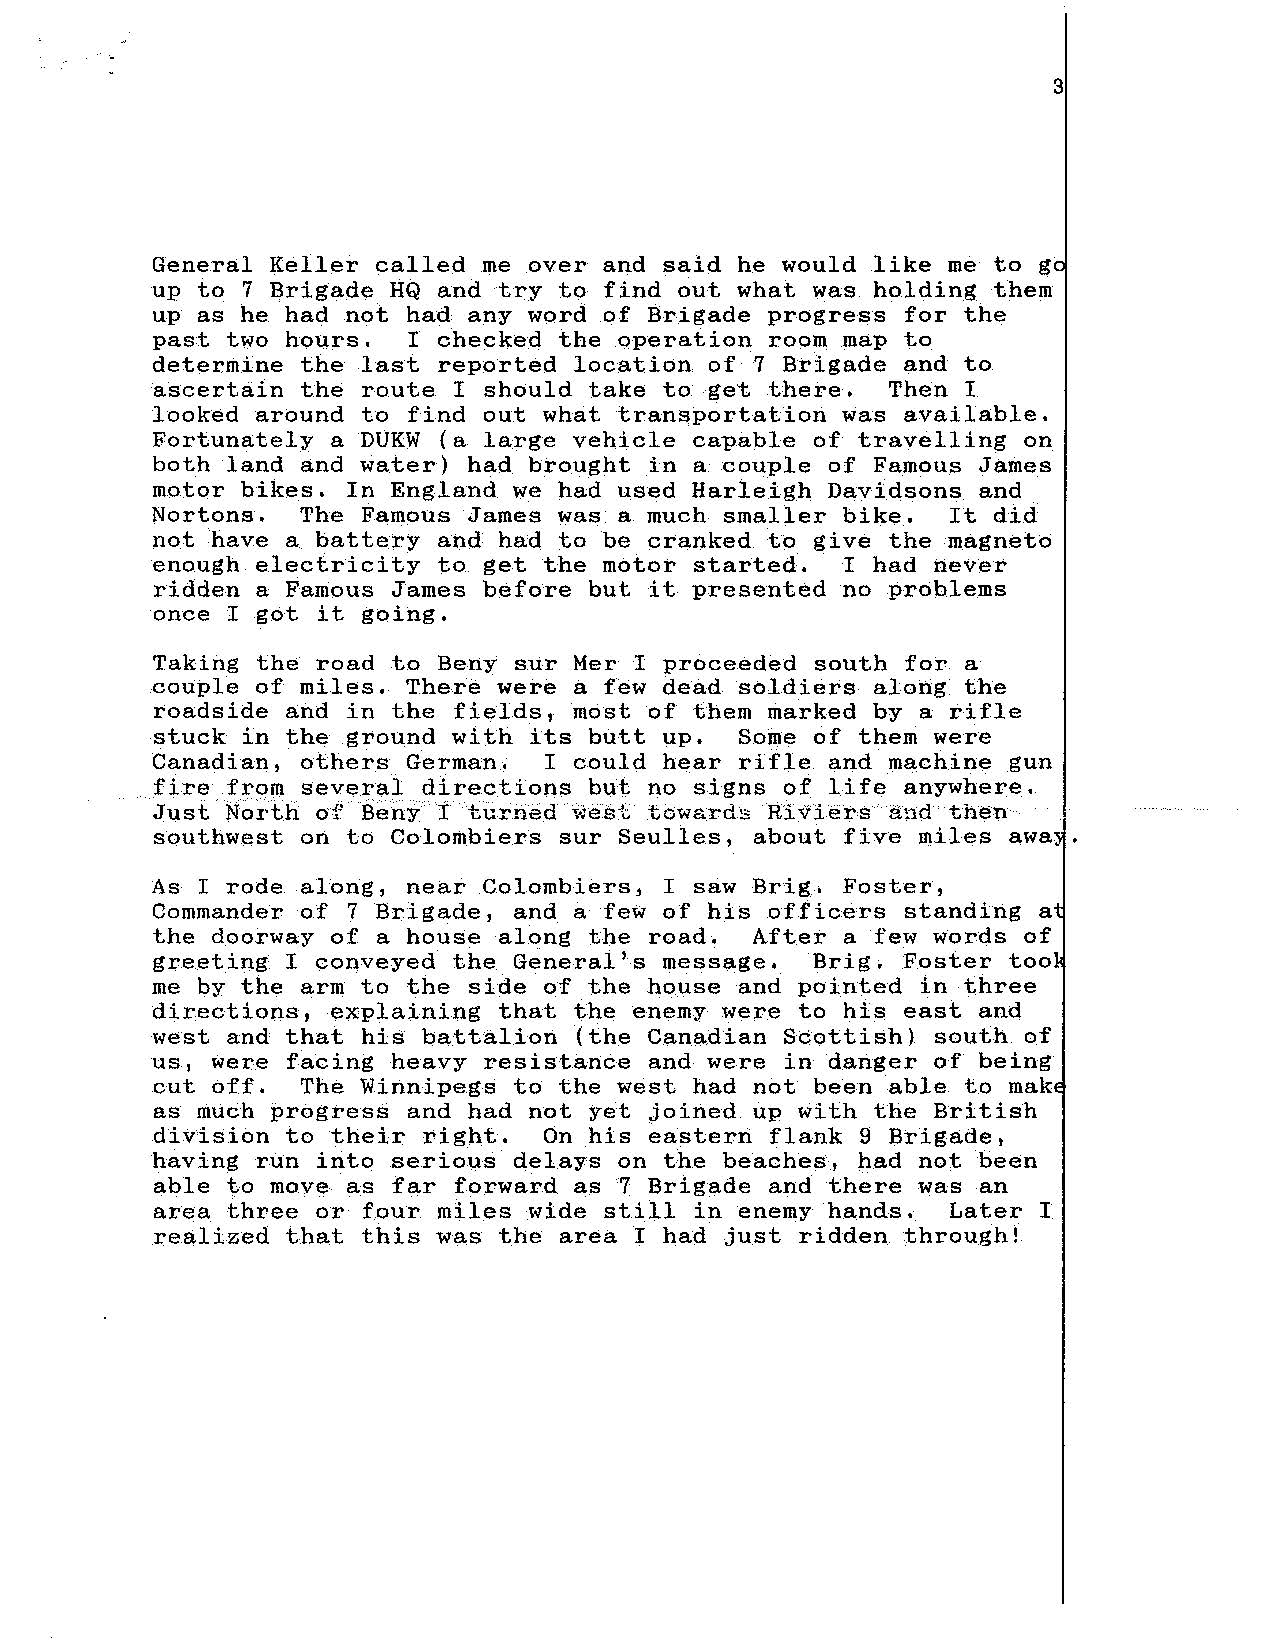 E. A. Olmsted D-Day Account  (Funeral Reading)_Page_3.jpg